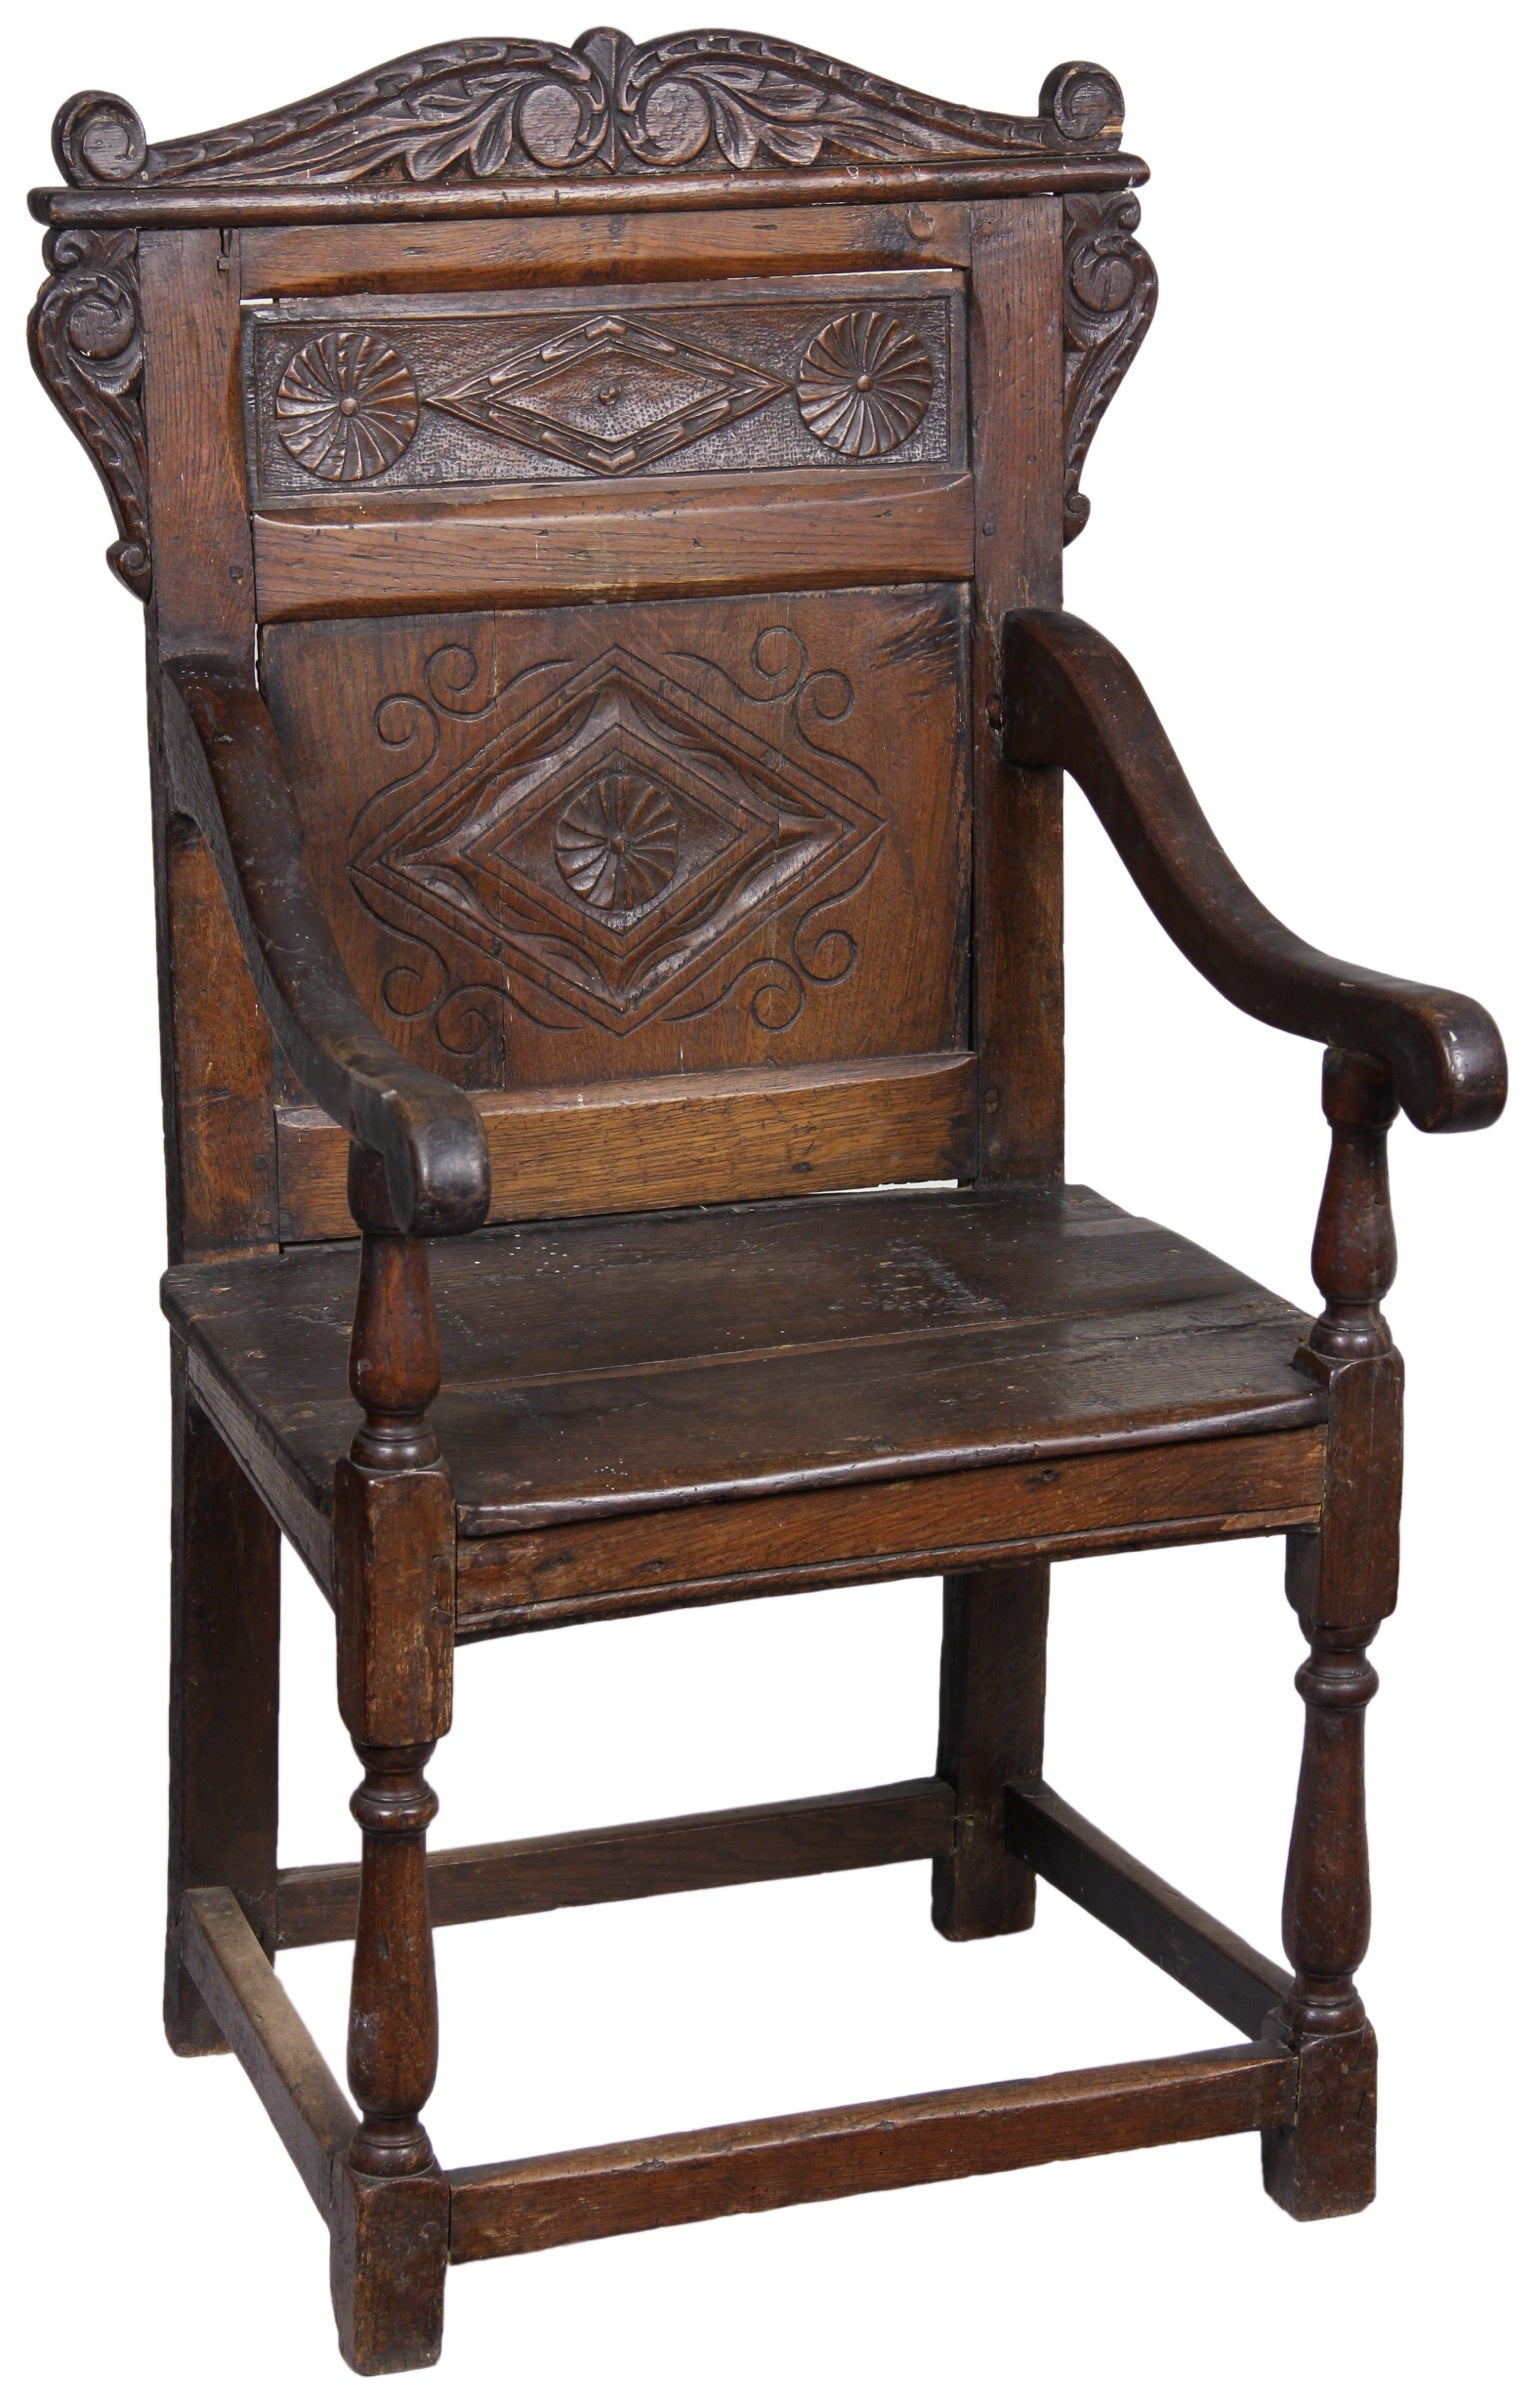 Carved Walnut William & Mary Wainscott or Panel Back Great Chair